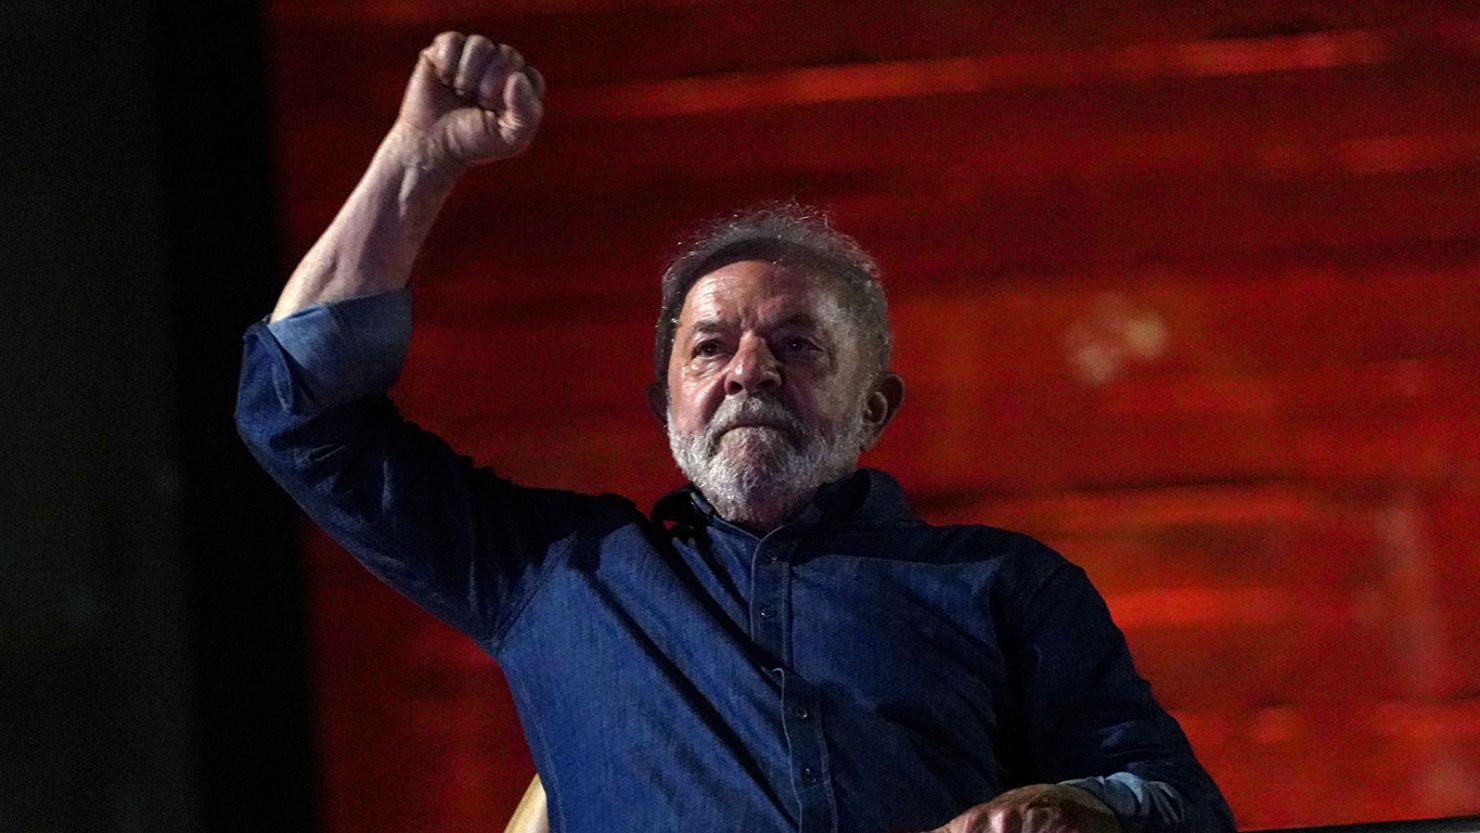 Brazil's former President and presidential candidate Luiz Inacio Lula da Silva reacts at an election night gathering on the day of the Brazilian presidential election run-off, in Sao Paulo, Brazil, October 30, 2022.